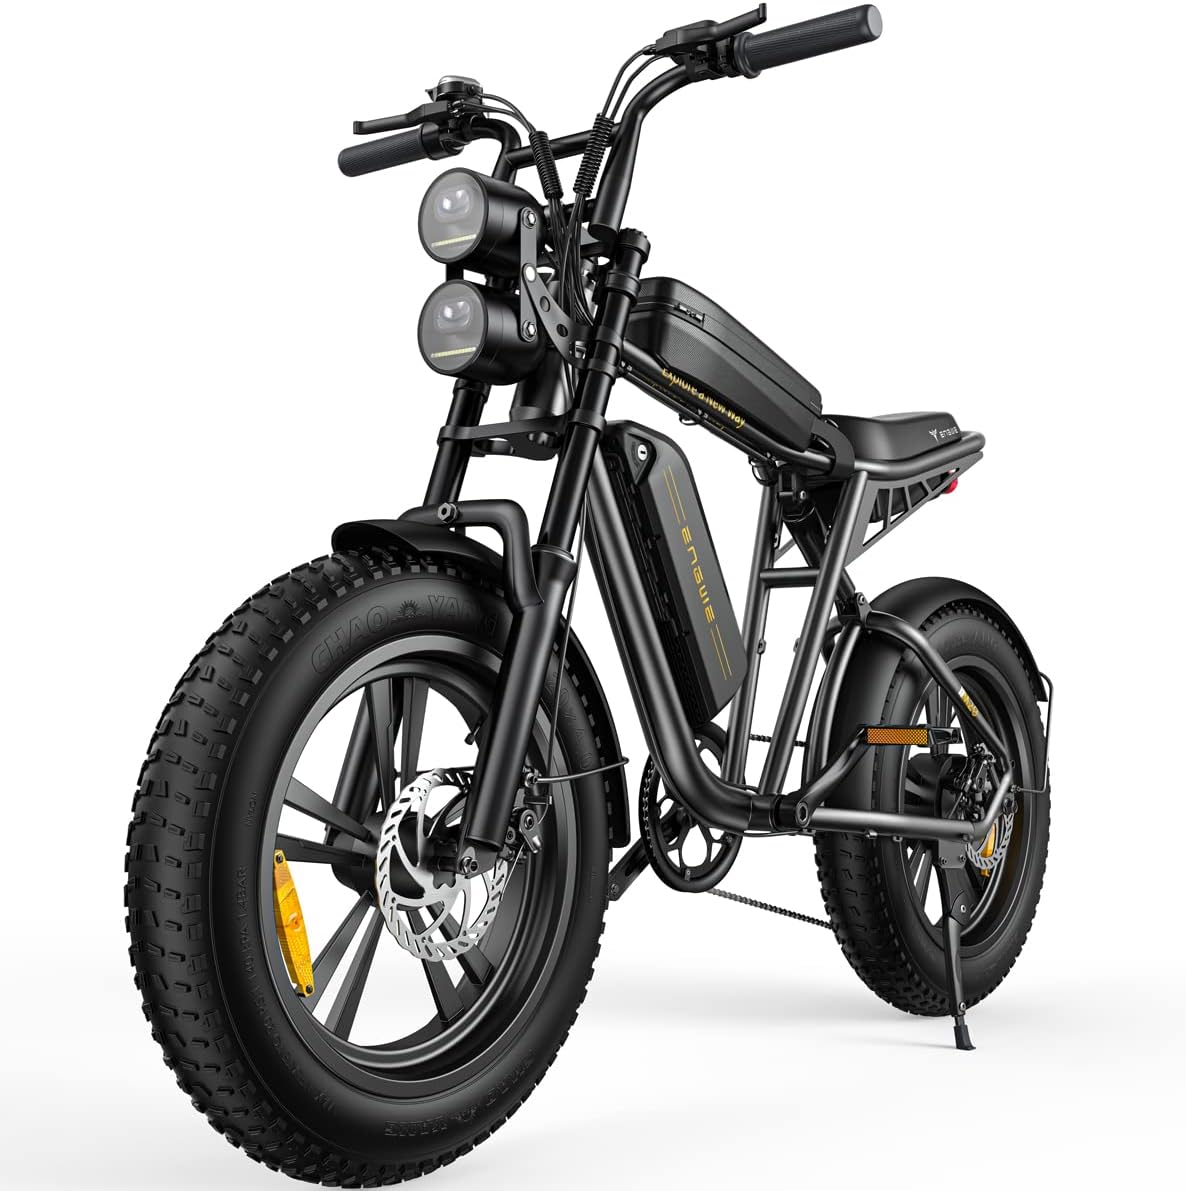 ENGWE M20 Ebikes for Adults - 750W Motor 4.0 * 20" Fat Tire Offroad Cruiser E Motorcycle 28MPH 94Miles Long Range for 48V13A Dual Battery Option,Full Suspension UL Certified, Green